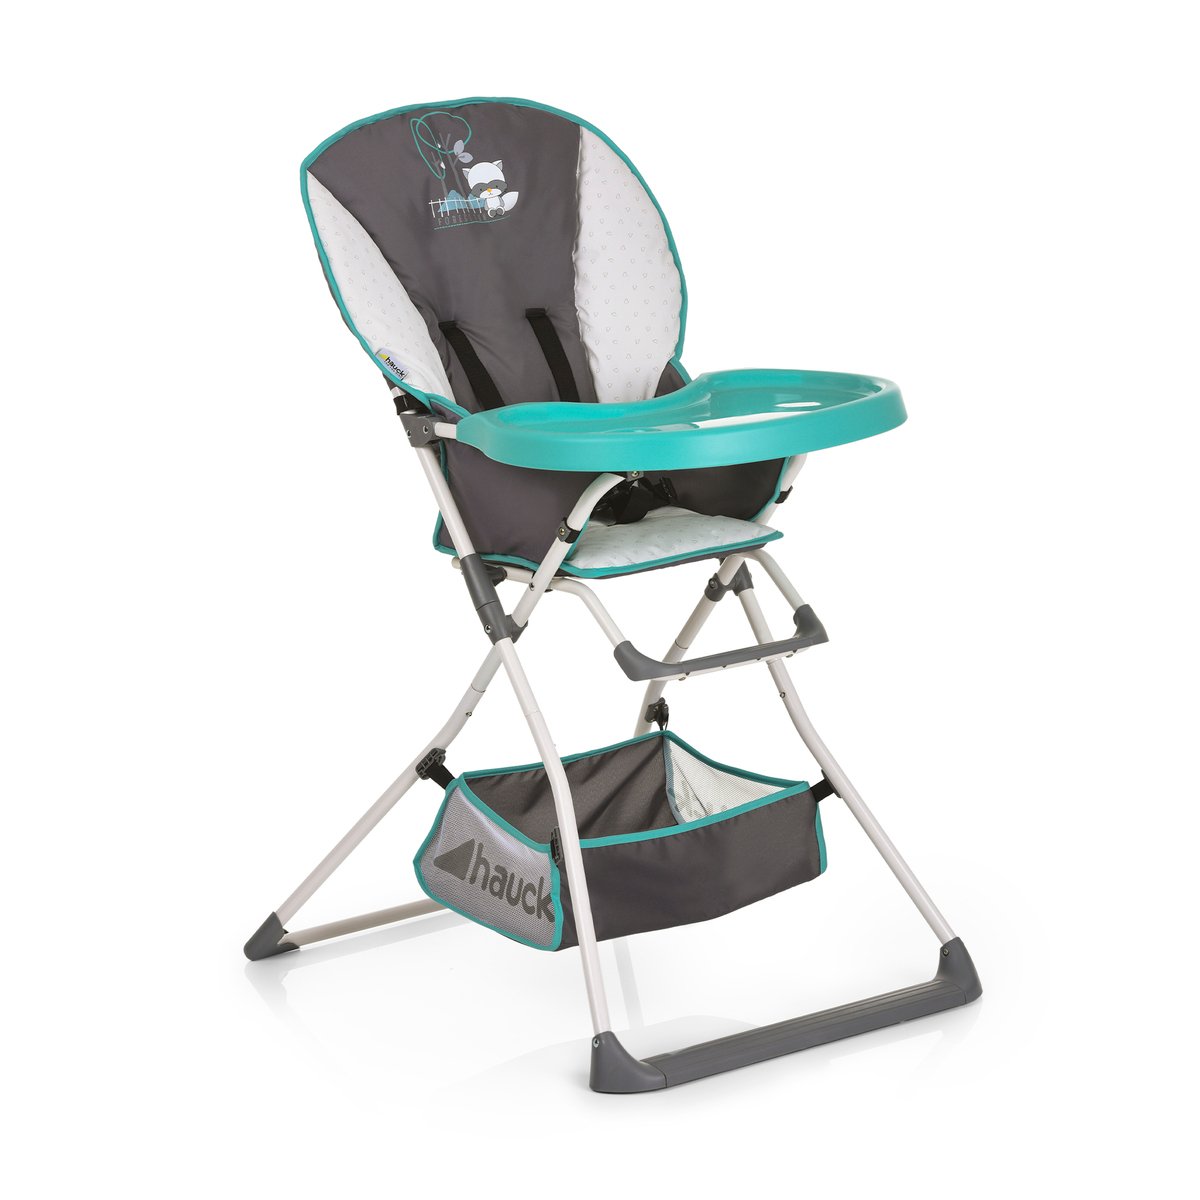 Hauck Baby High Chair 639672